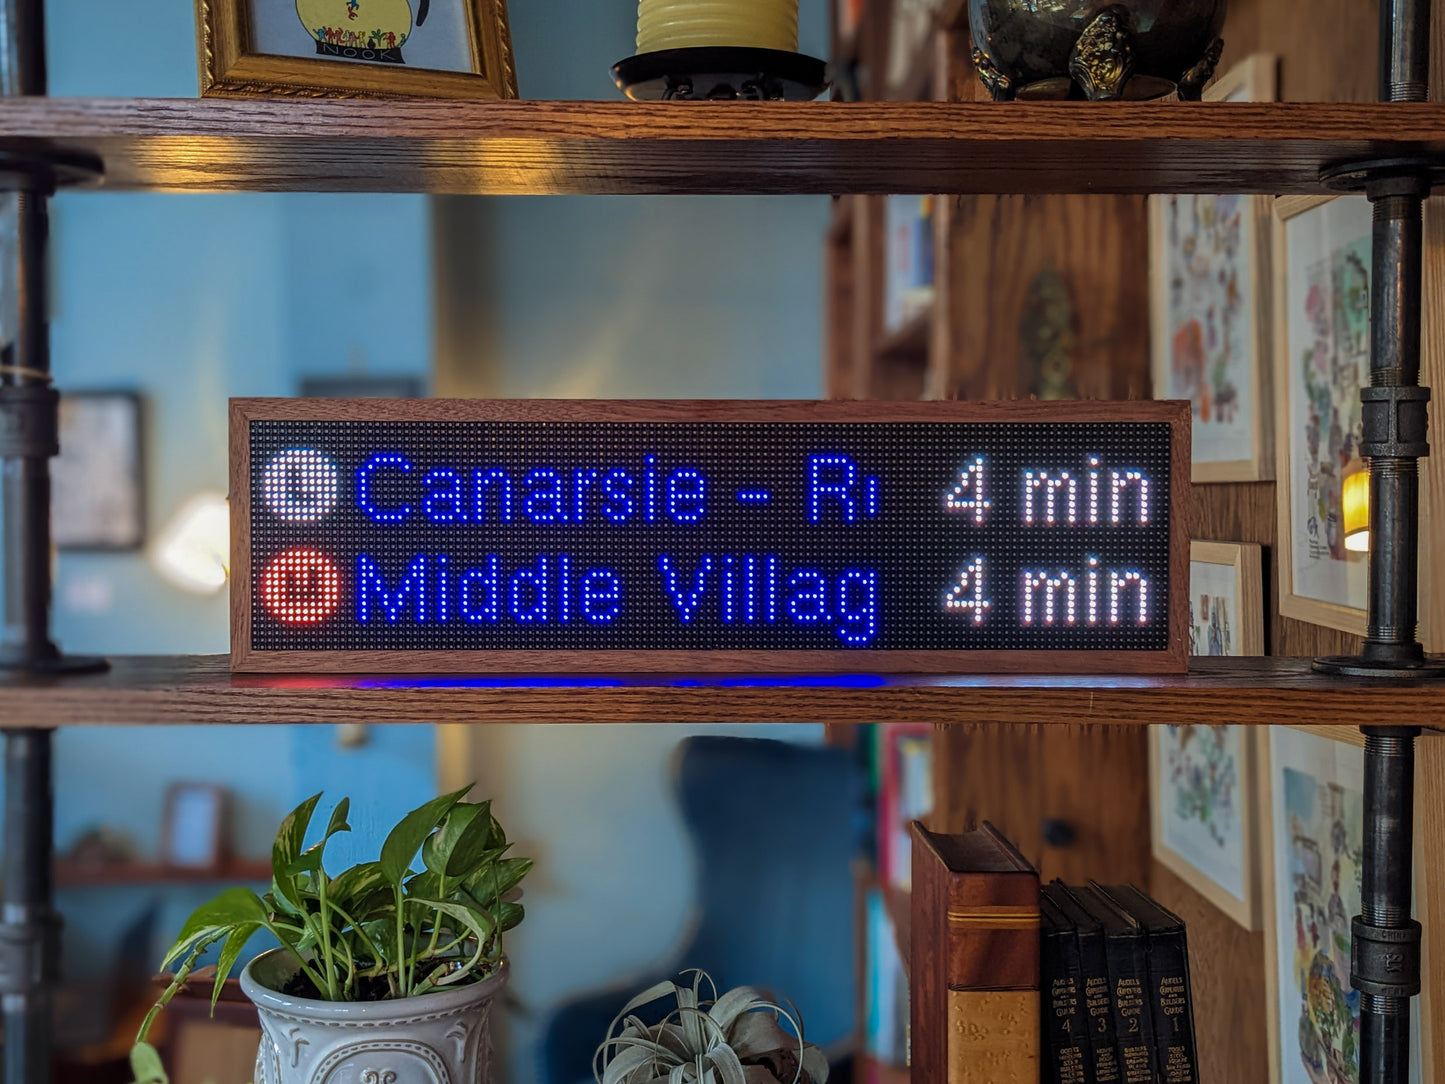 The MTA Realtime Subway Clock sits on the middle shelf of a mahogany bookcase. Mahogany frames a black-led screen that reads, "L Canarsie - R 4 min" and below that "M Middle Villag 4 Min". The shelf above holds a gold-framed picture and candle that are cut-off from view. The shelf below holds a potted green plant, a silver plant, a thick brown leather book and 4 black leather books with gold embossing.